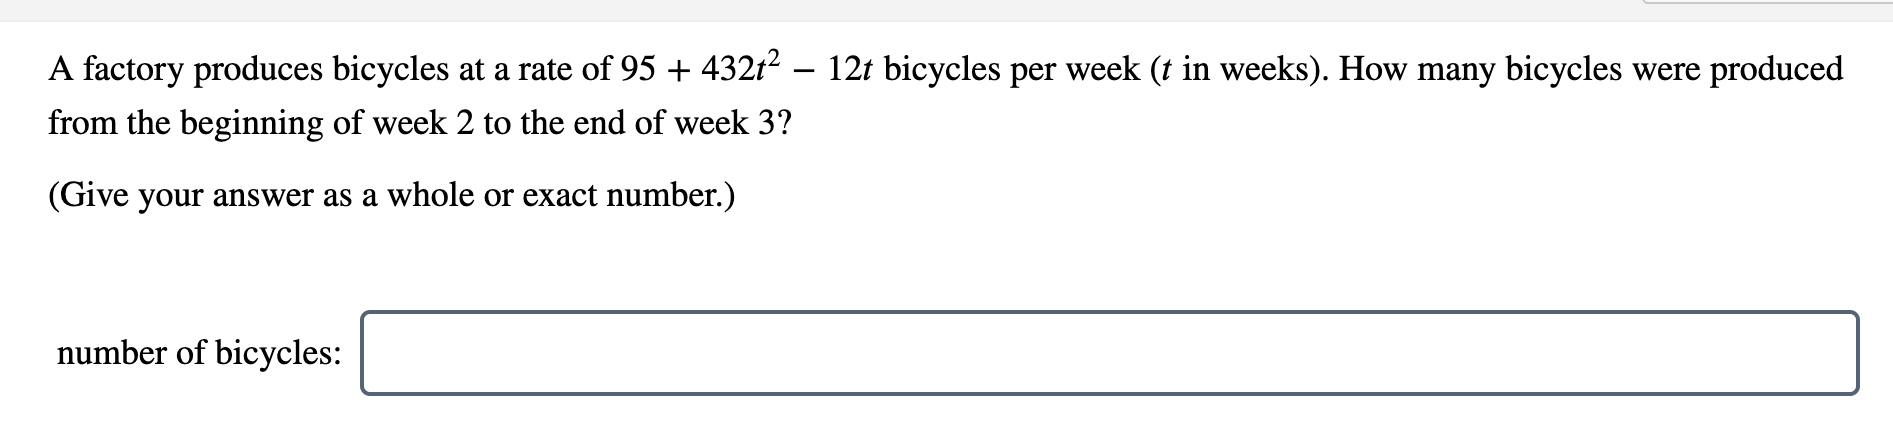 A factory produces bicycles at a rate of 95 + 432t² – 12t bicycles per week (t in weeks). How many bicycles were produced
from the beginning of week 2 to the end of week 3?
(Give your answer as a whole or exact number.)
number of bicycles:
